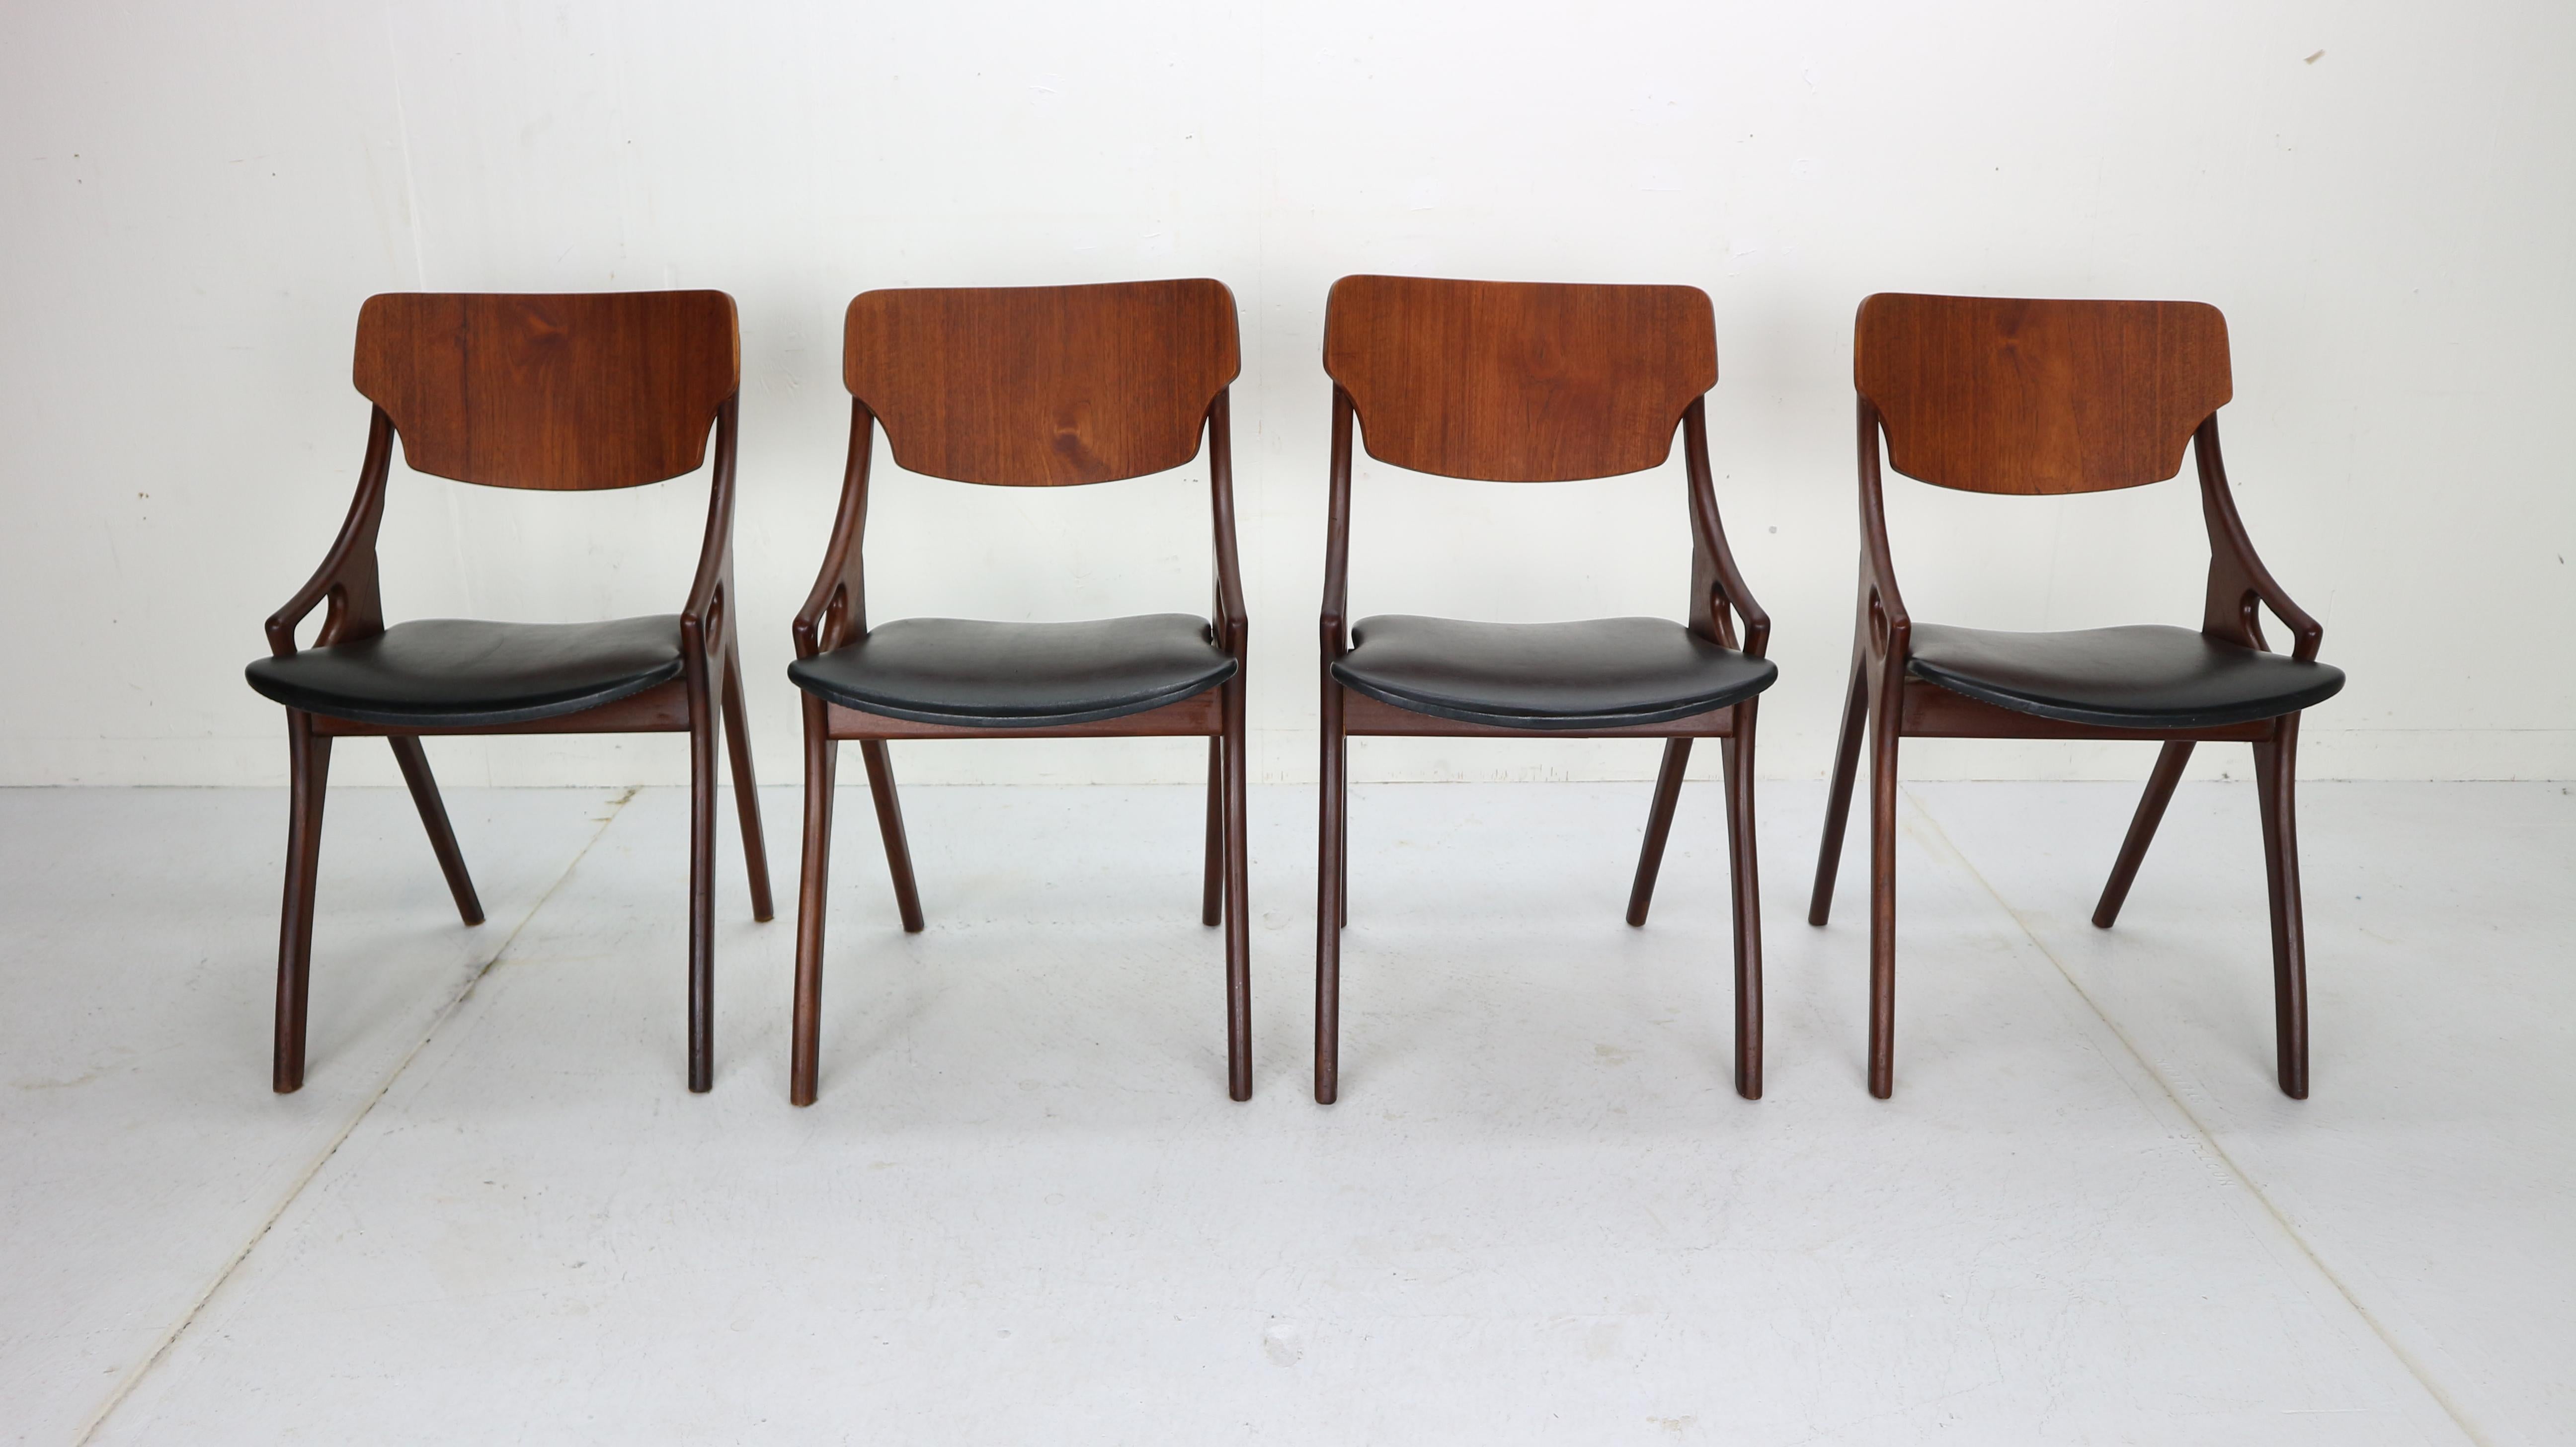 This sculptural set of four dining chairs is designed by the Dane Arne Hovmand-Olsen for Mogens Kold Møbelfabrik. Model 71 made in Denmark, 1959.
Teak wooden frame.
The chairs are organic in their shape as can be seen in the rounded, almost branch